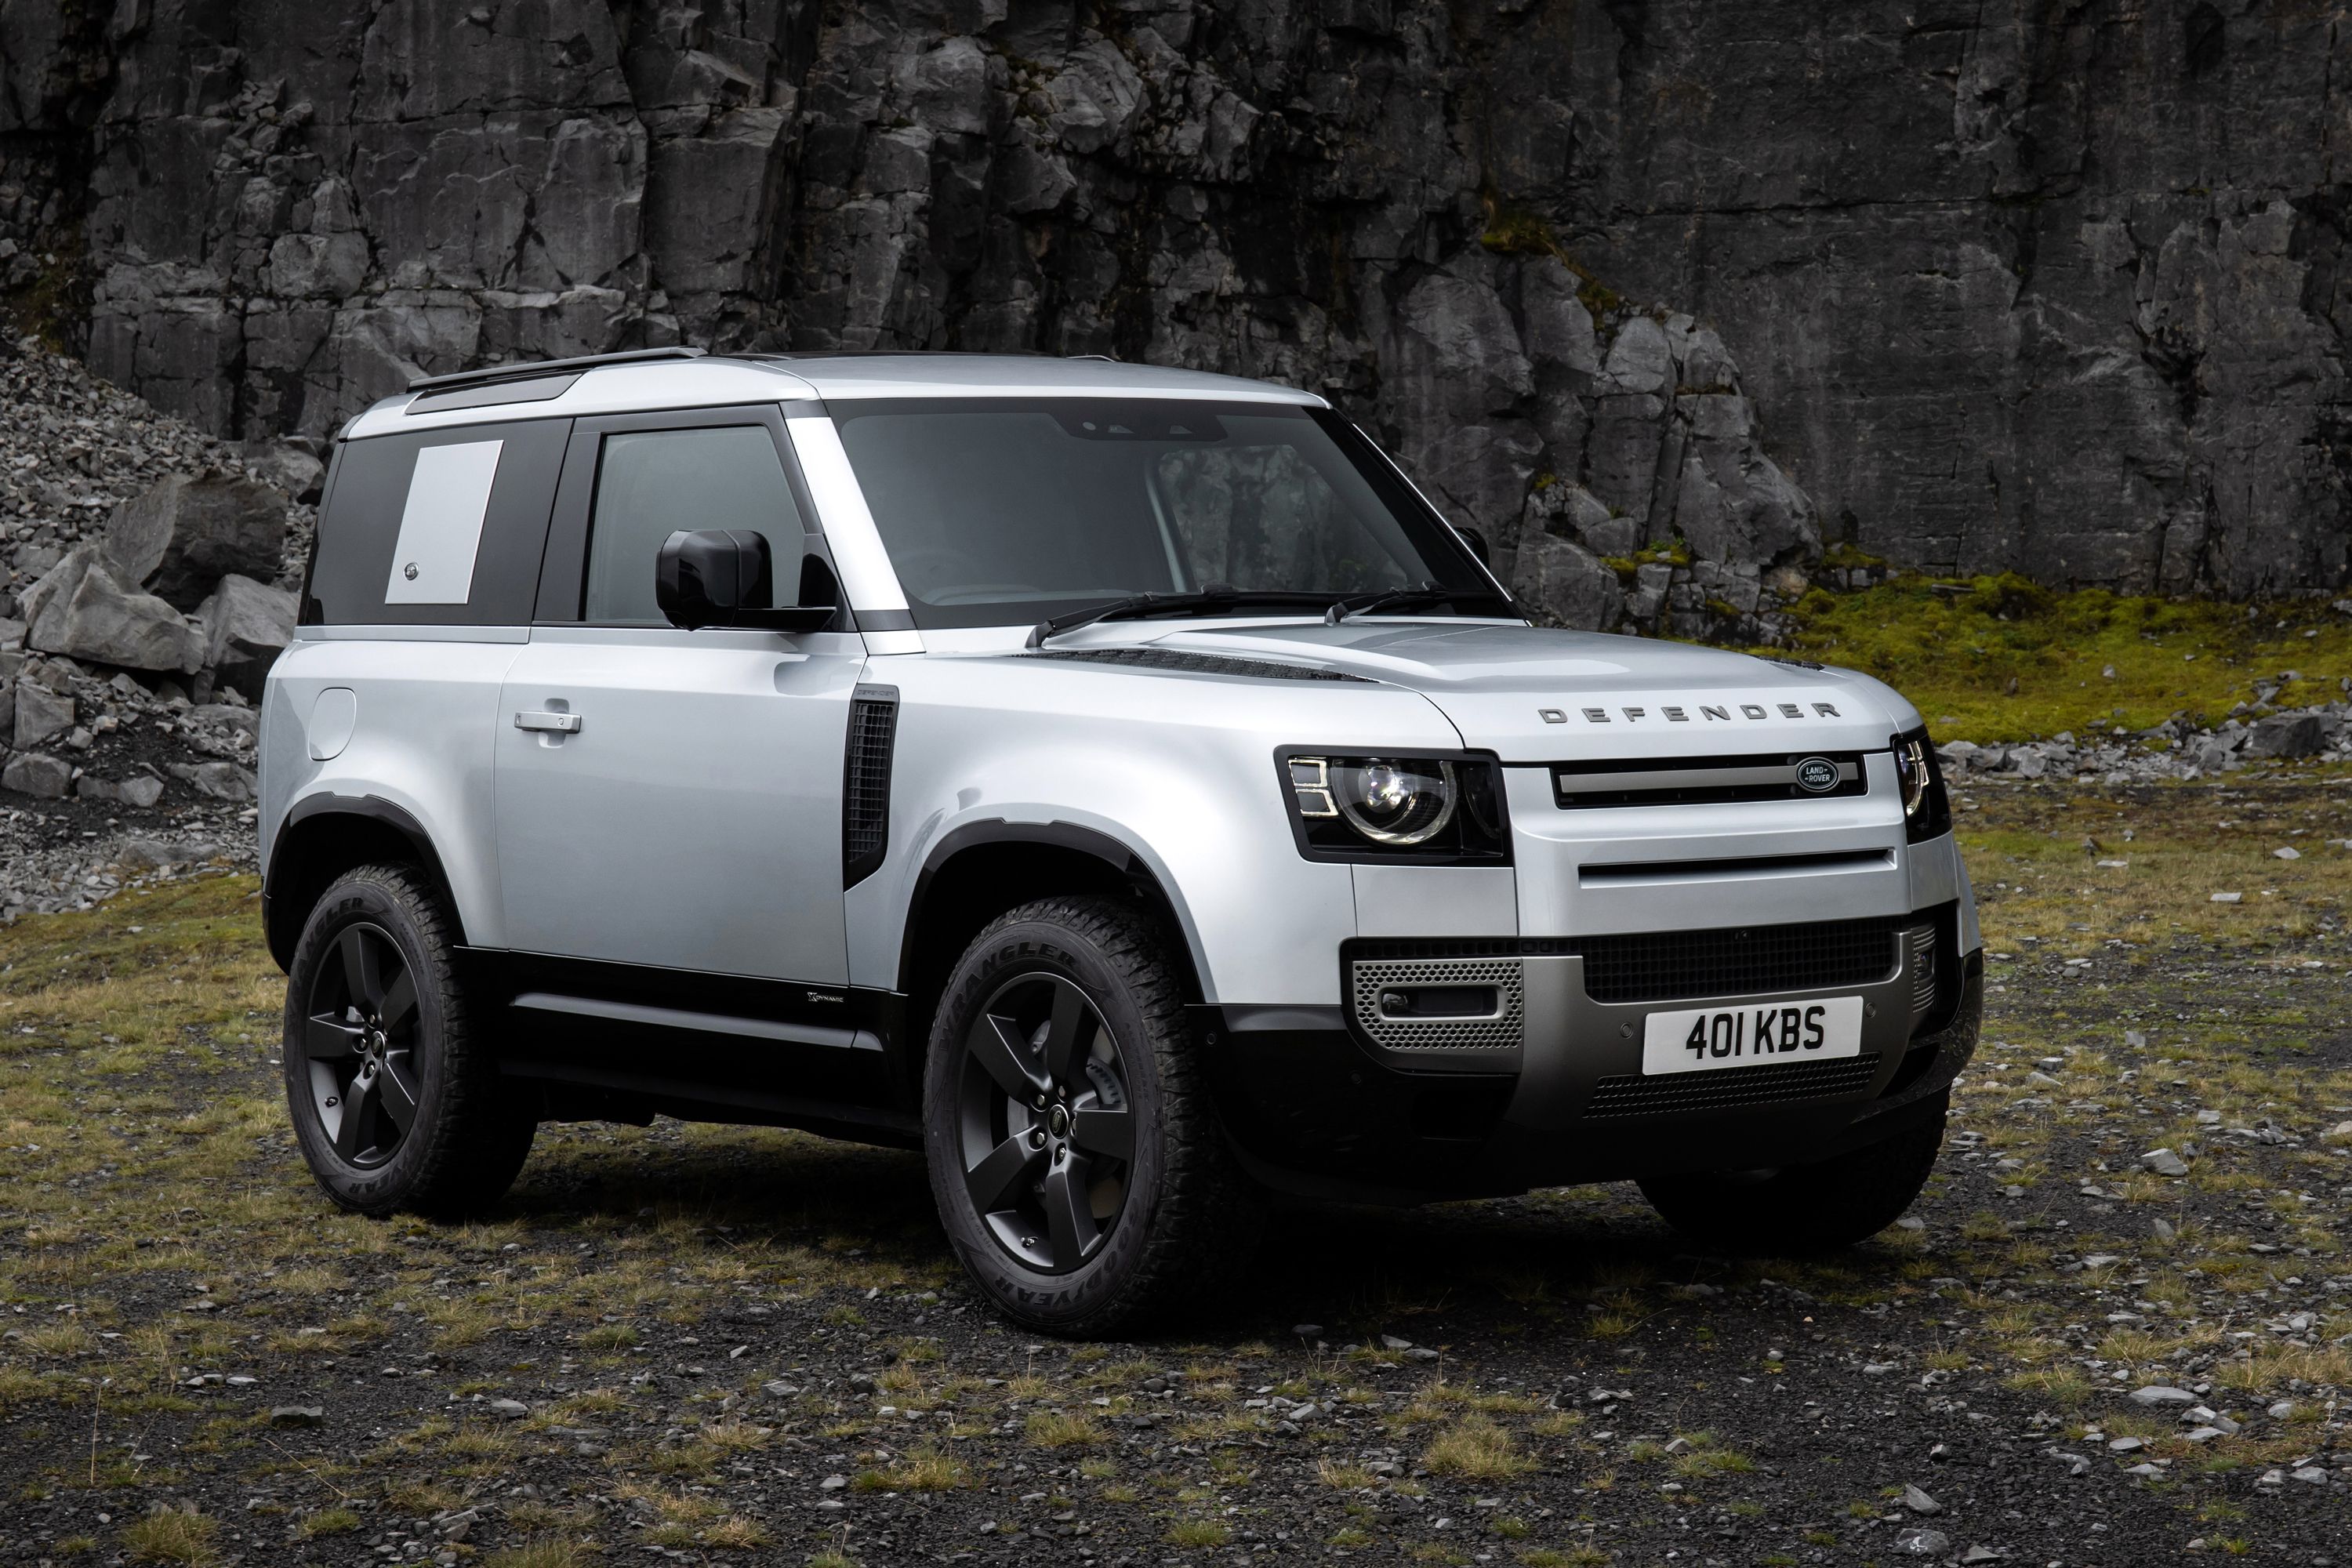 Land Rover Defender family to get all-new luxury flagship